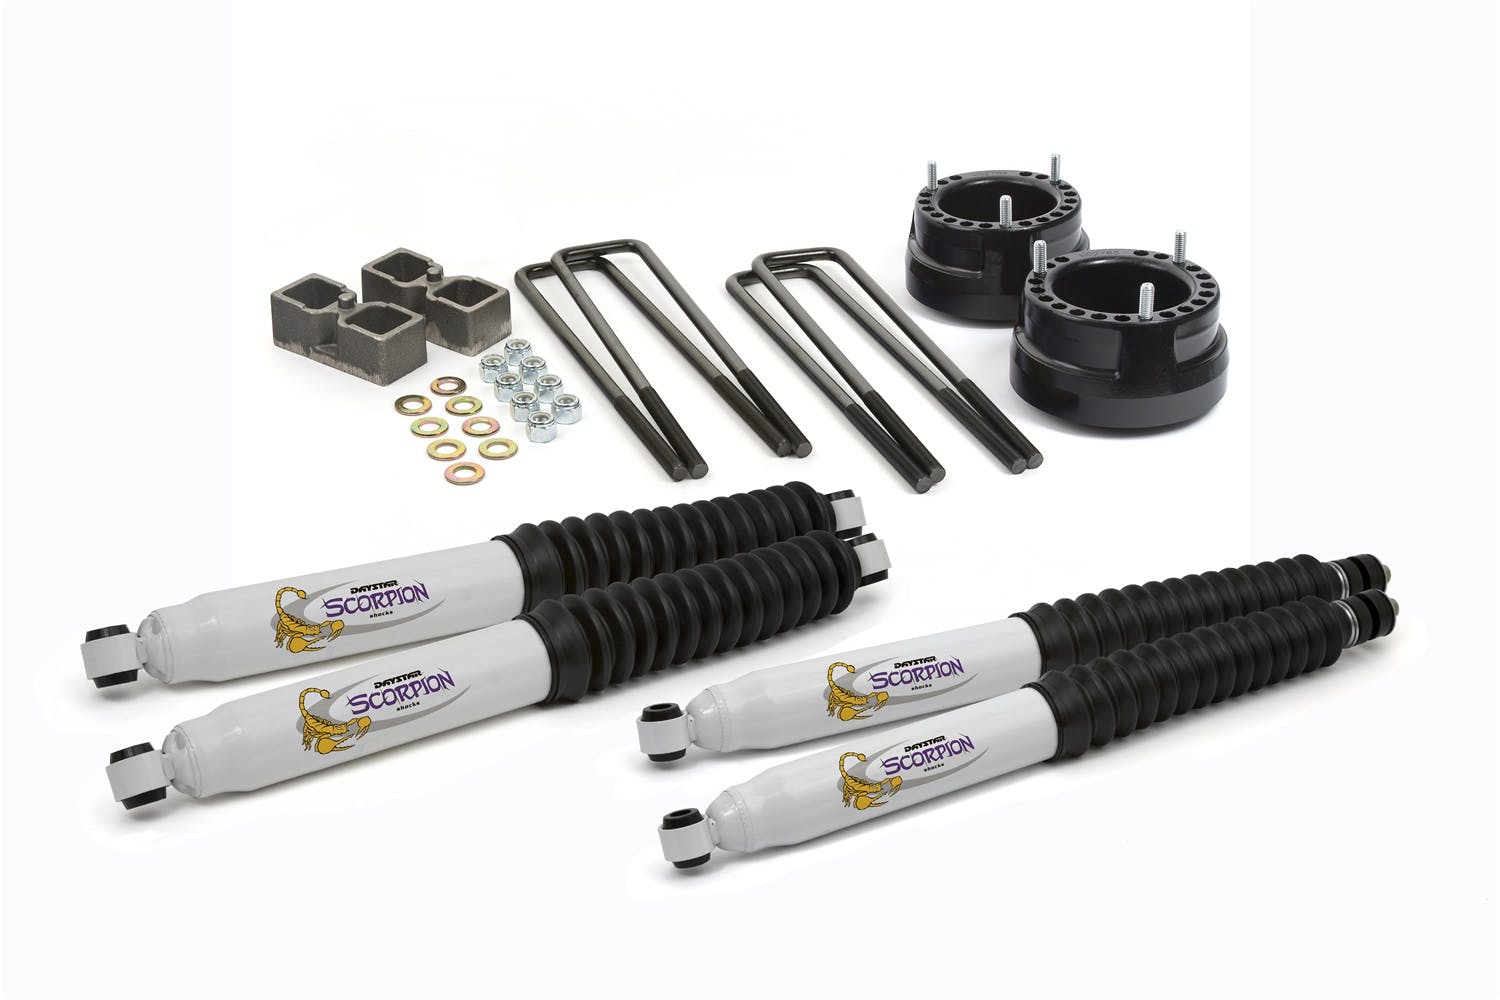 Daystar KC09123BK Suspension Lift Kit; 2 inch Front Coil Spring Spacers; 2 inch Rear Blocks w/ U-bolts